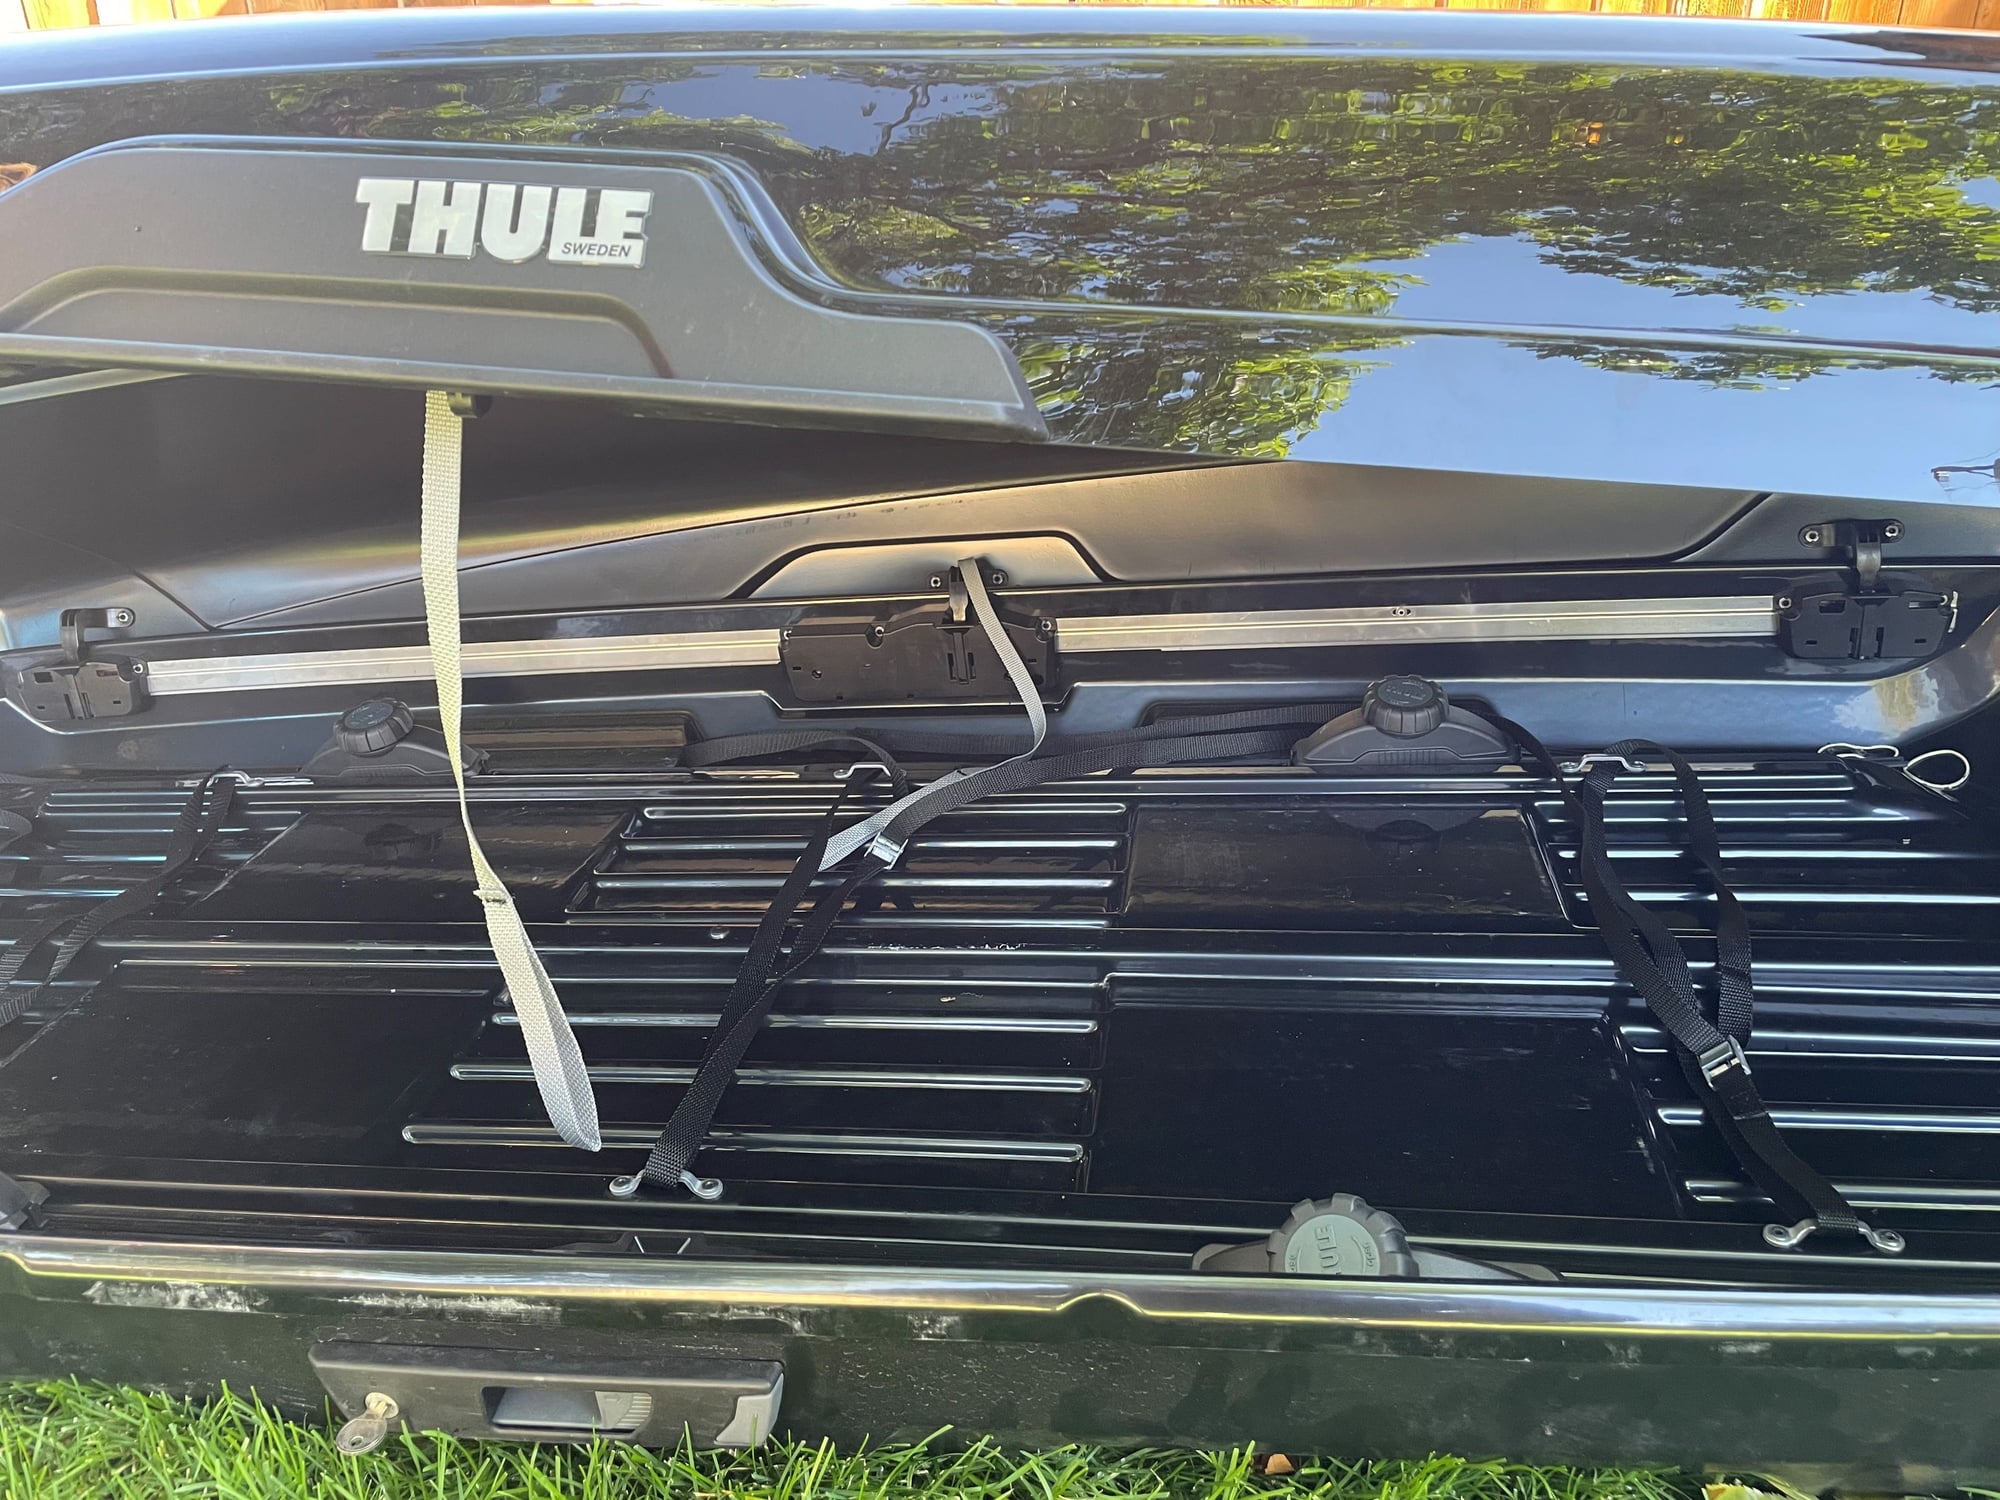 Accessories - Thule Roof Rack System and Thule Cargo Box - Used - 2018 to 2023 Audi Q7 - Denver, CO 80209, United States